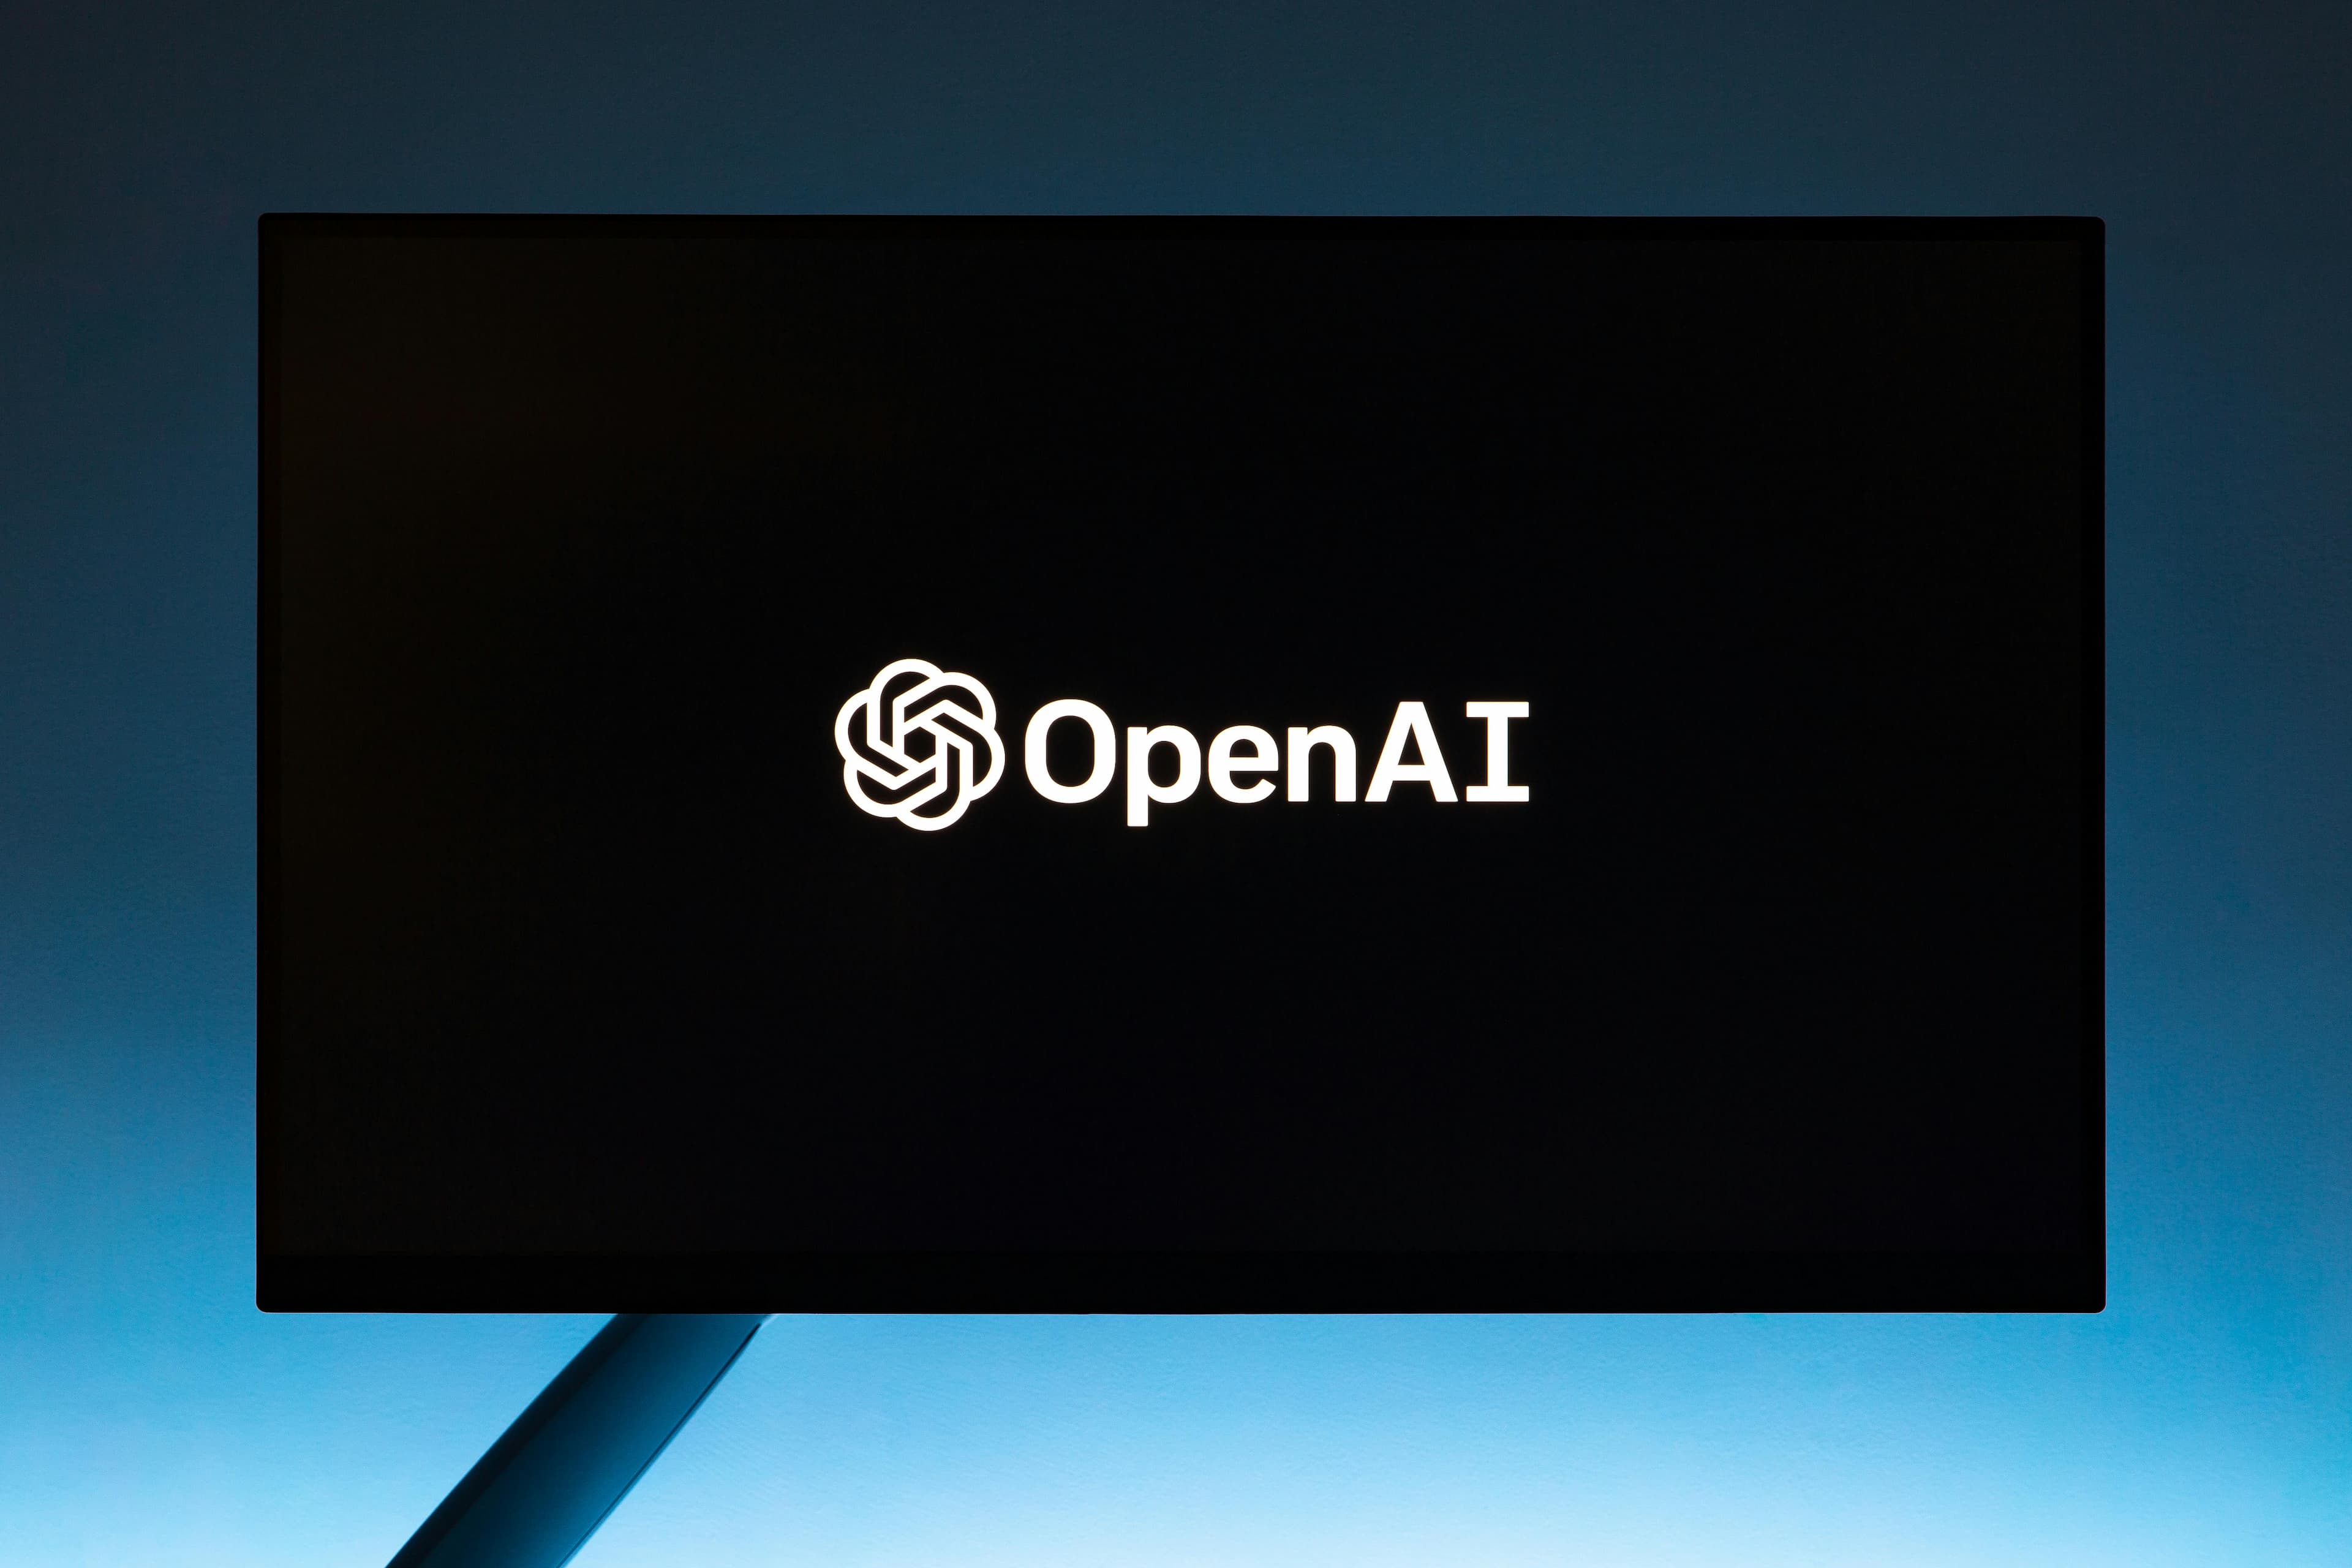 GPT-5 Release Date: What You Need To Know About OpenAI's Next Generation AI Model